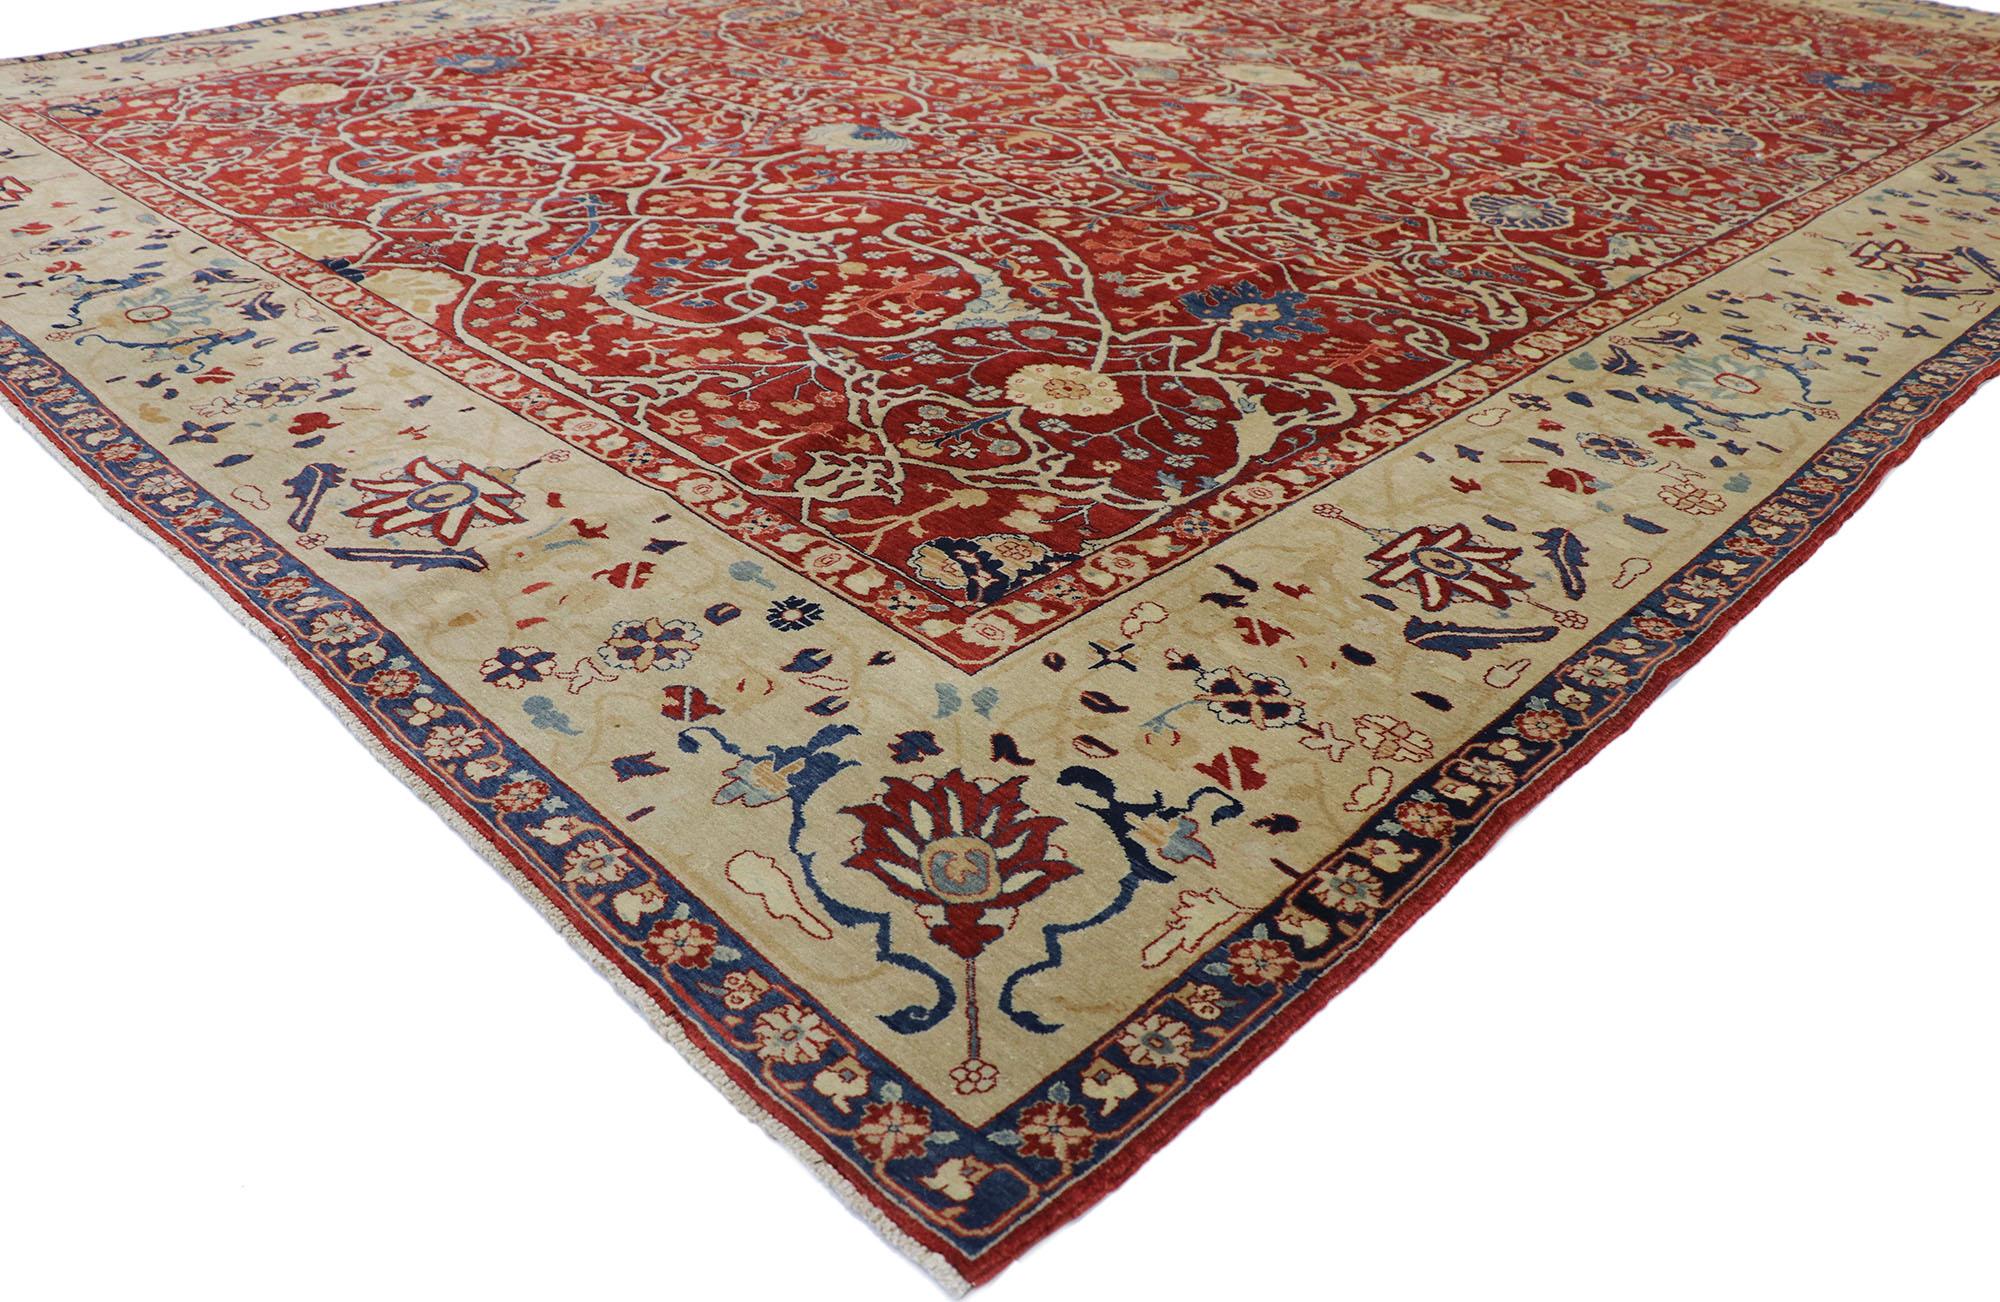 77643, vintage Indian Agra rug with Modern Jacobean style. With its deep red hues and beguiling beauty, this hand-knotted wool vintage Indian Agra rug will take on a curated lived-in look that feels timeless while imparting a sense of warmth and